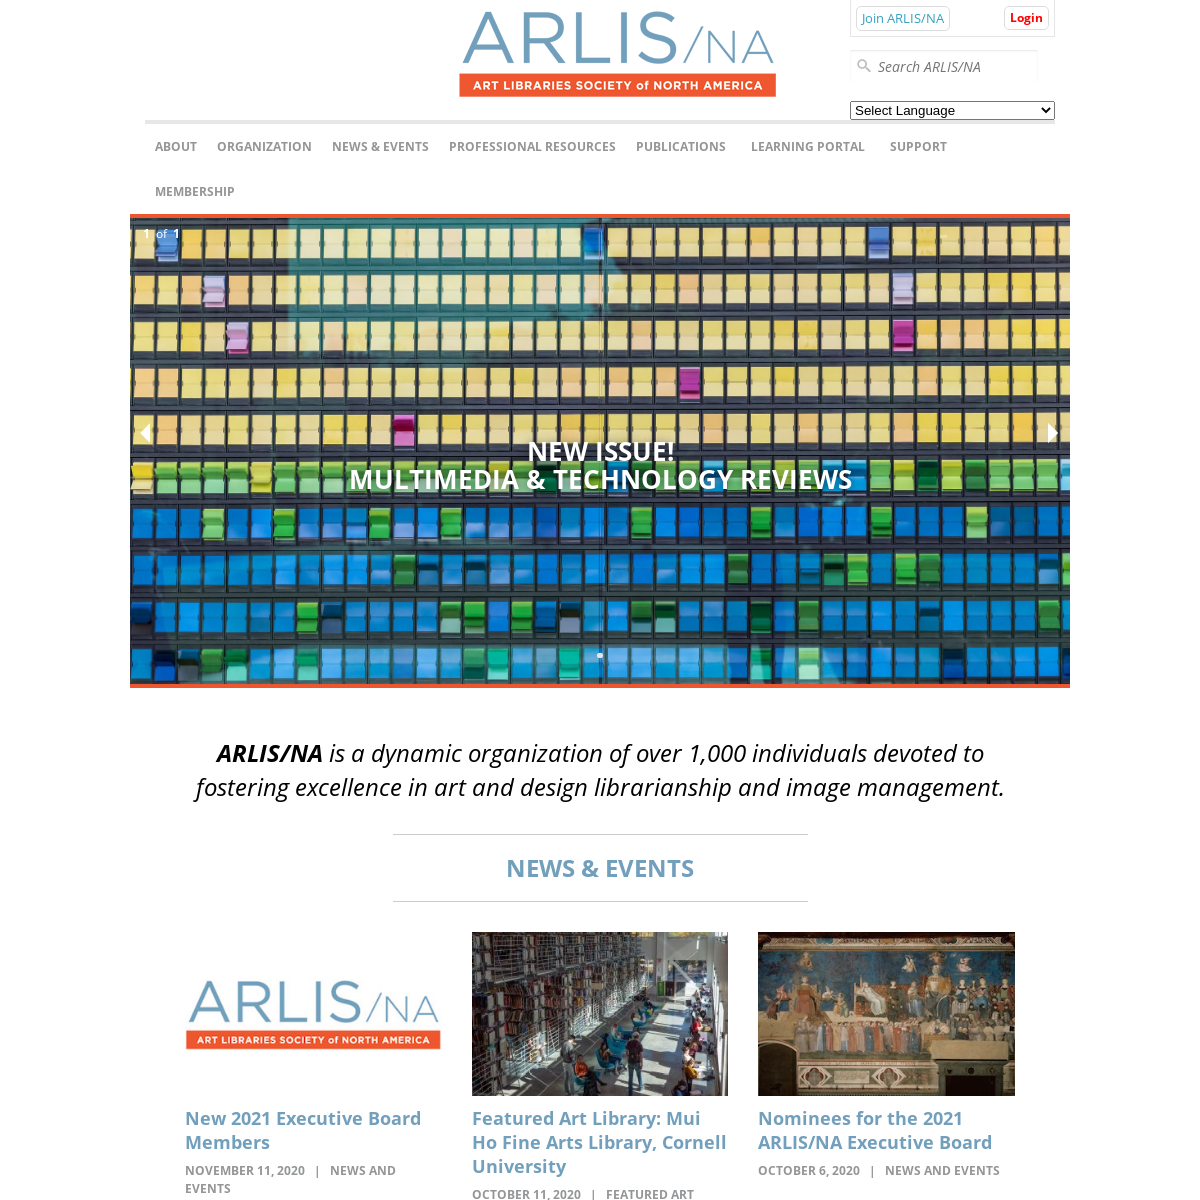 A complete backup of arlisna.org